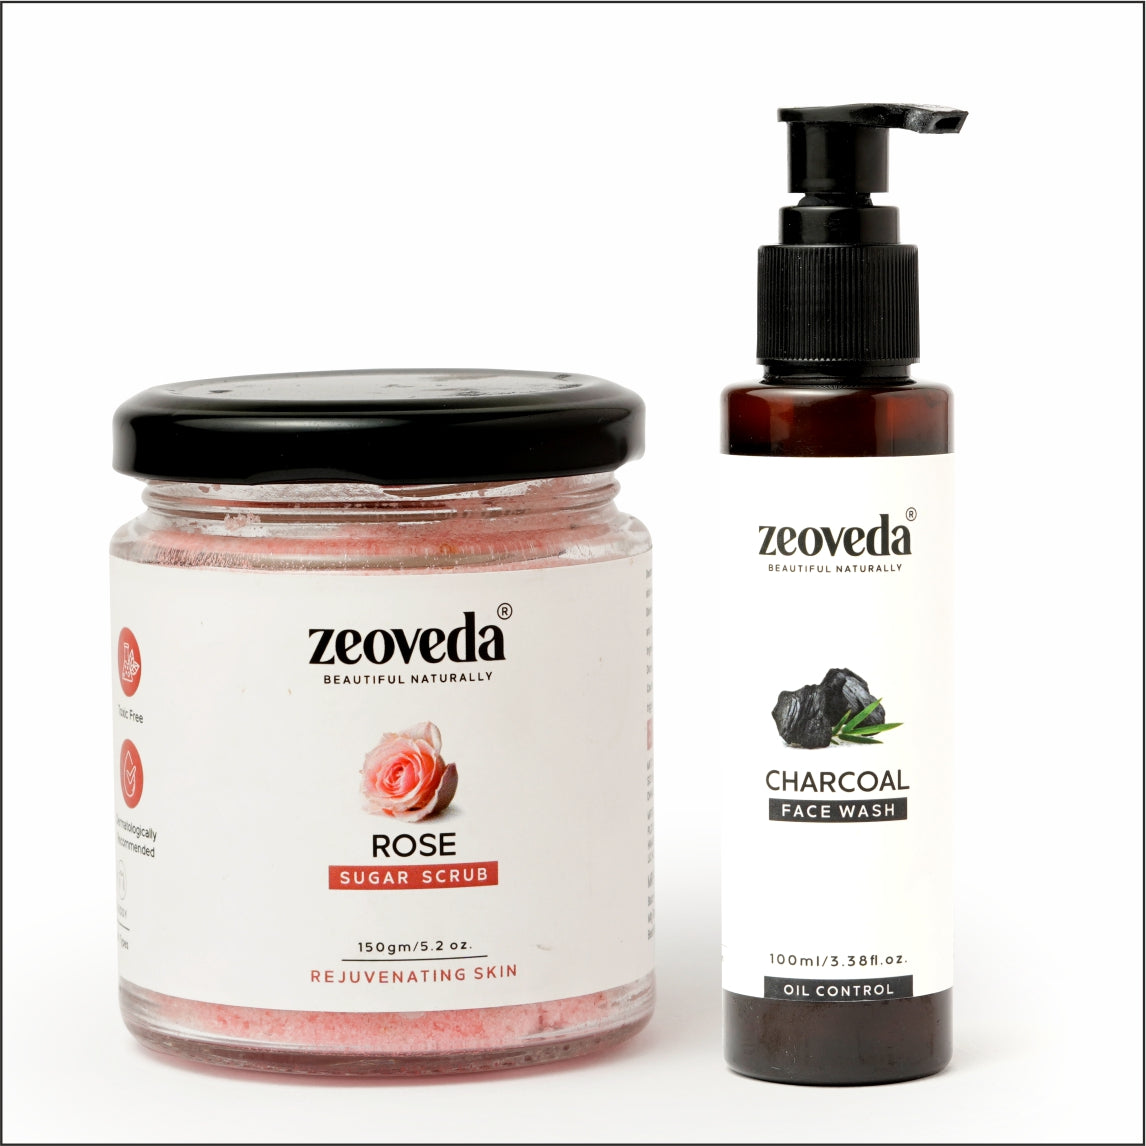 Rose Sugar Scrub(150GM) + Charcoal Face Wash(100ML) Combo For Impurity Free Natural Glow